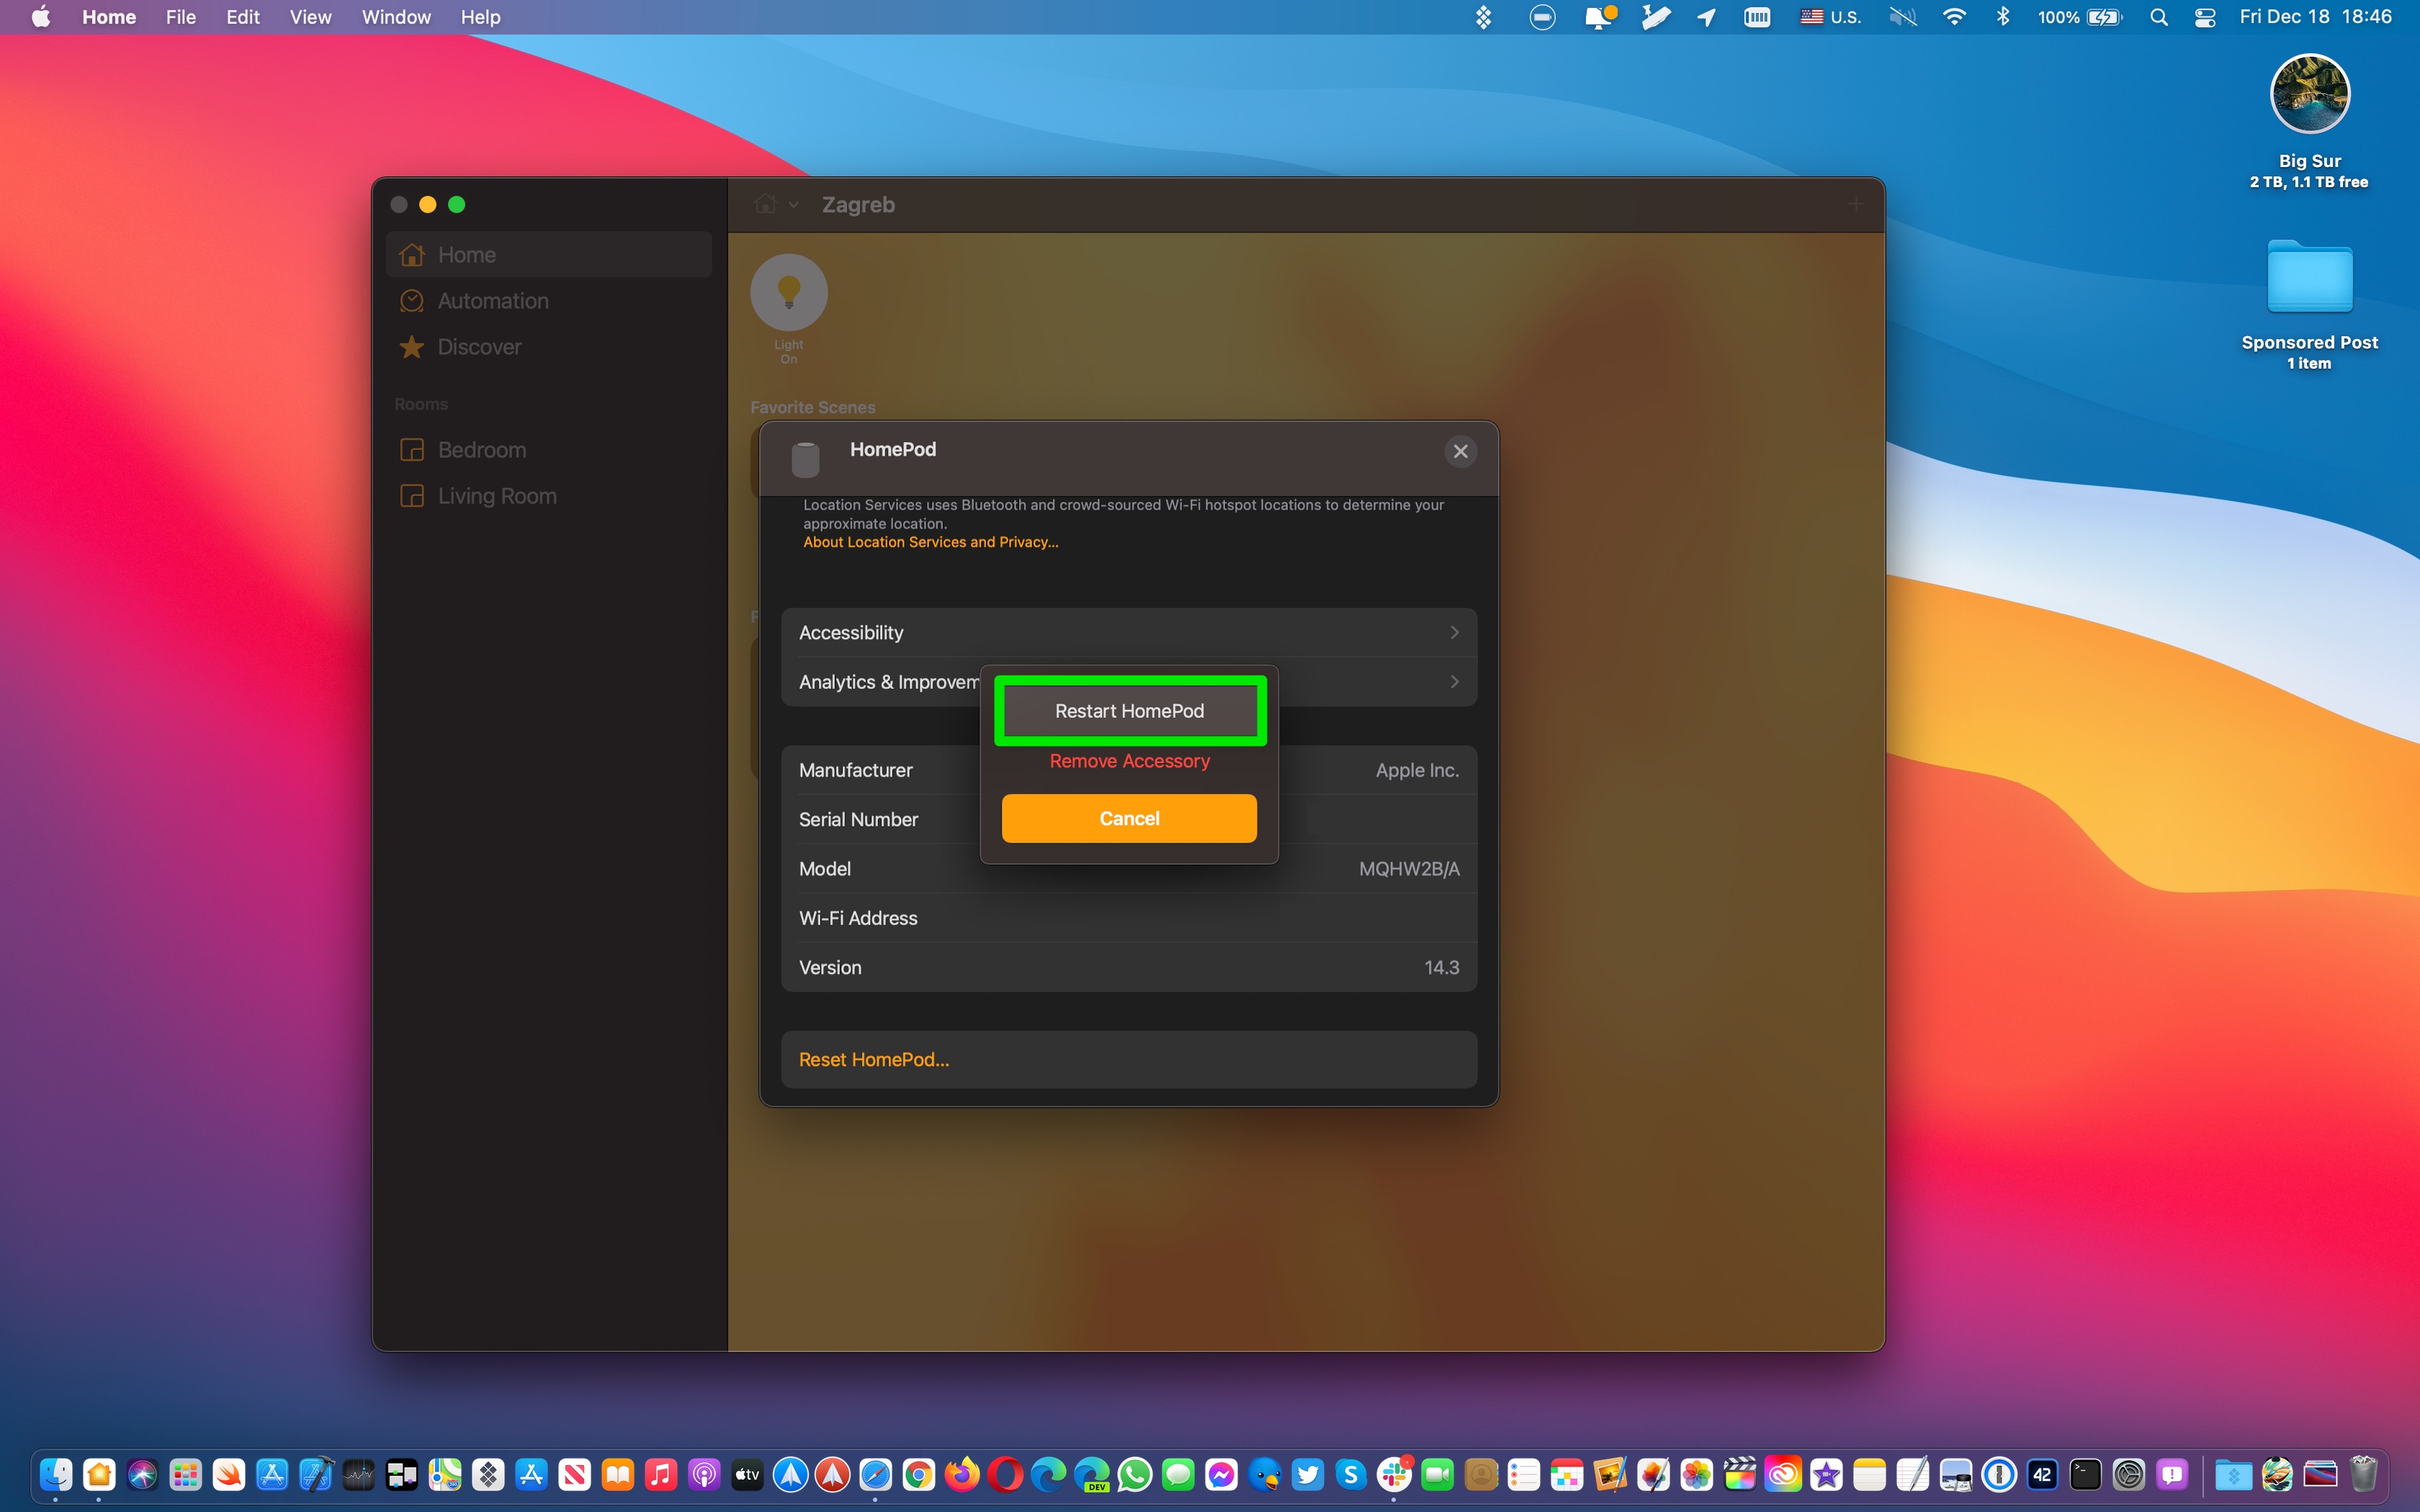 Restart HomePod - a screenshot showing the process in the Home app on the Mac